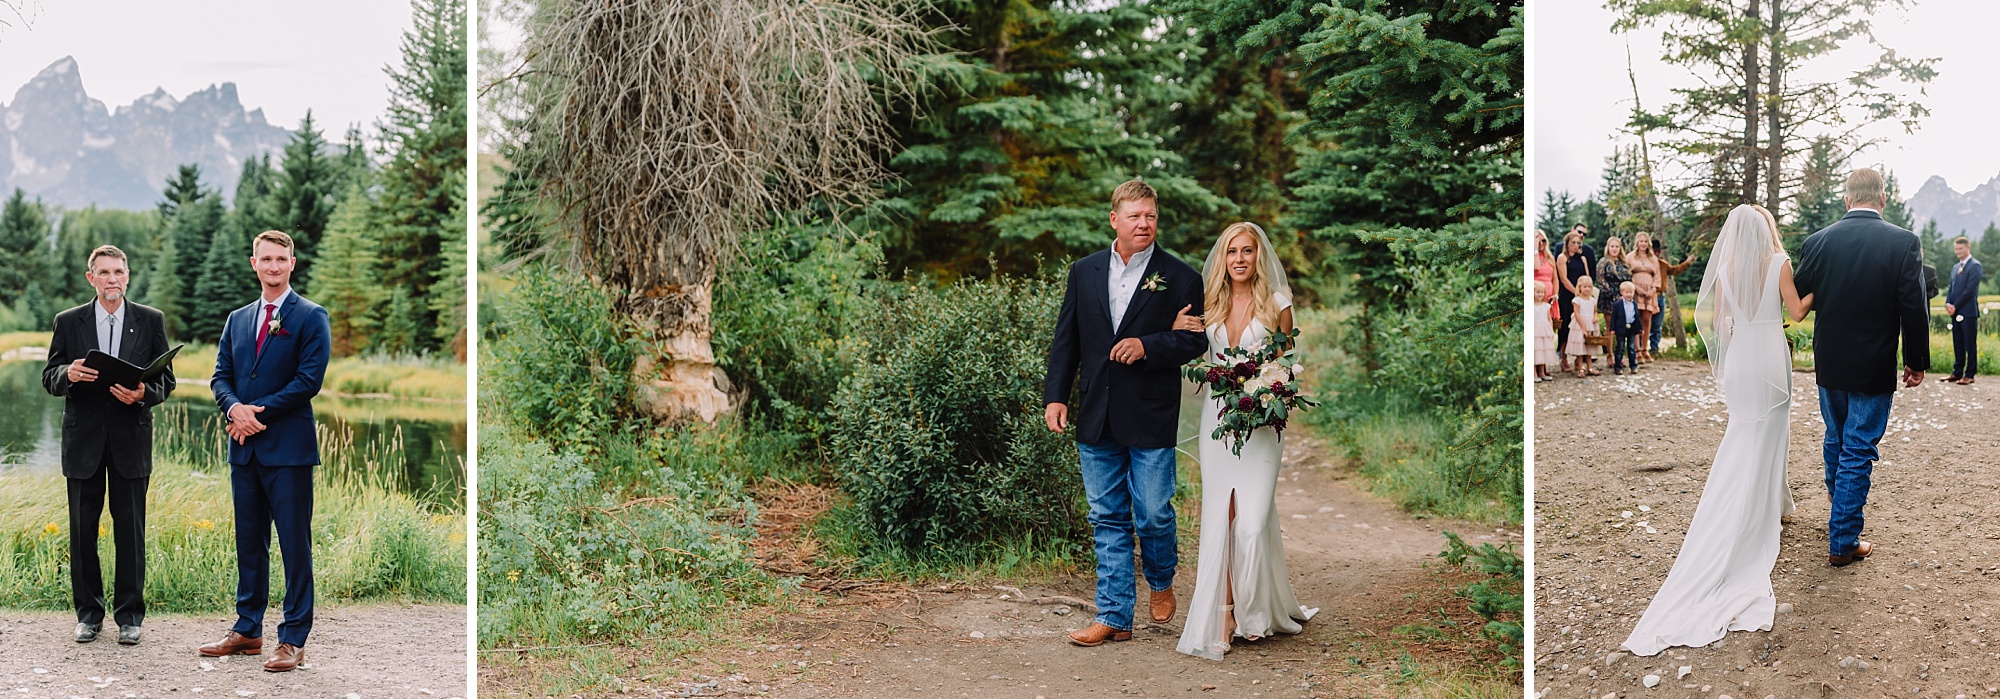 father-of-the-bride-and-bride-walking-down-aisle-elope-in-the-tetons-elopement-destination-wedding-grand-teton-national-park-romantic-timeless-classic-schwabacher-landing